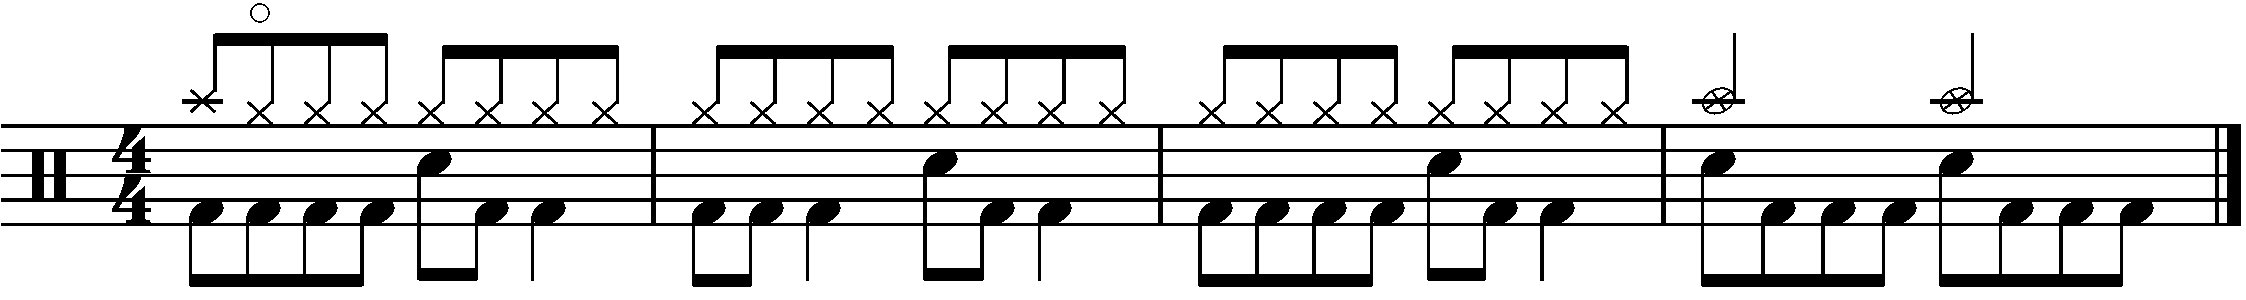 A four bar phrase made up of A B and C sections in half time